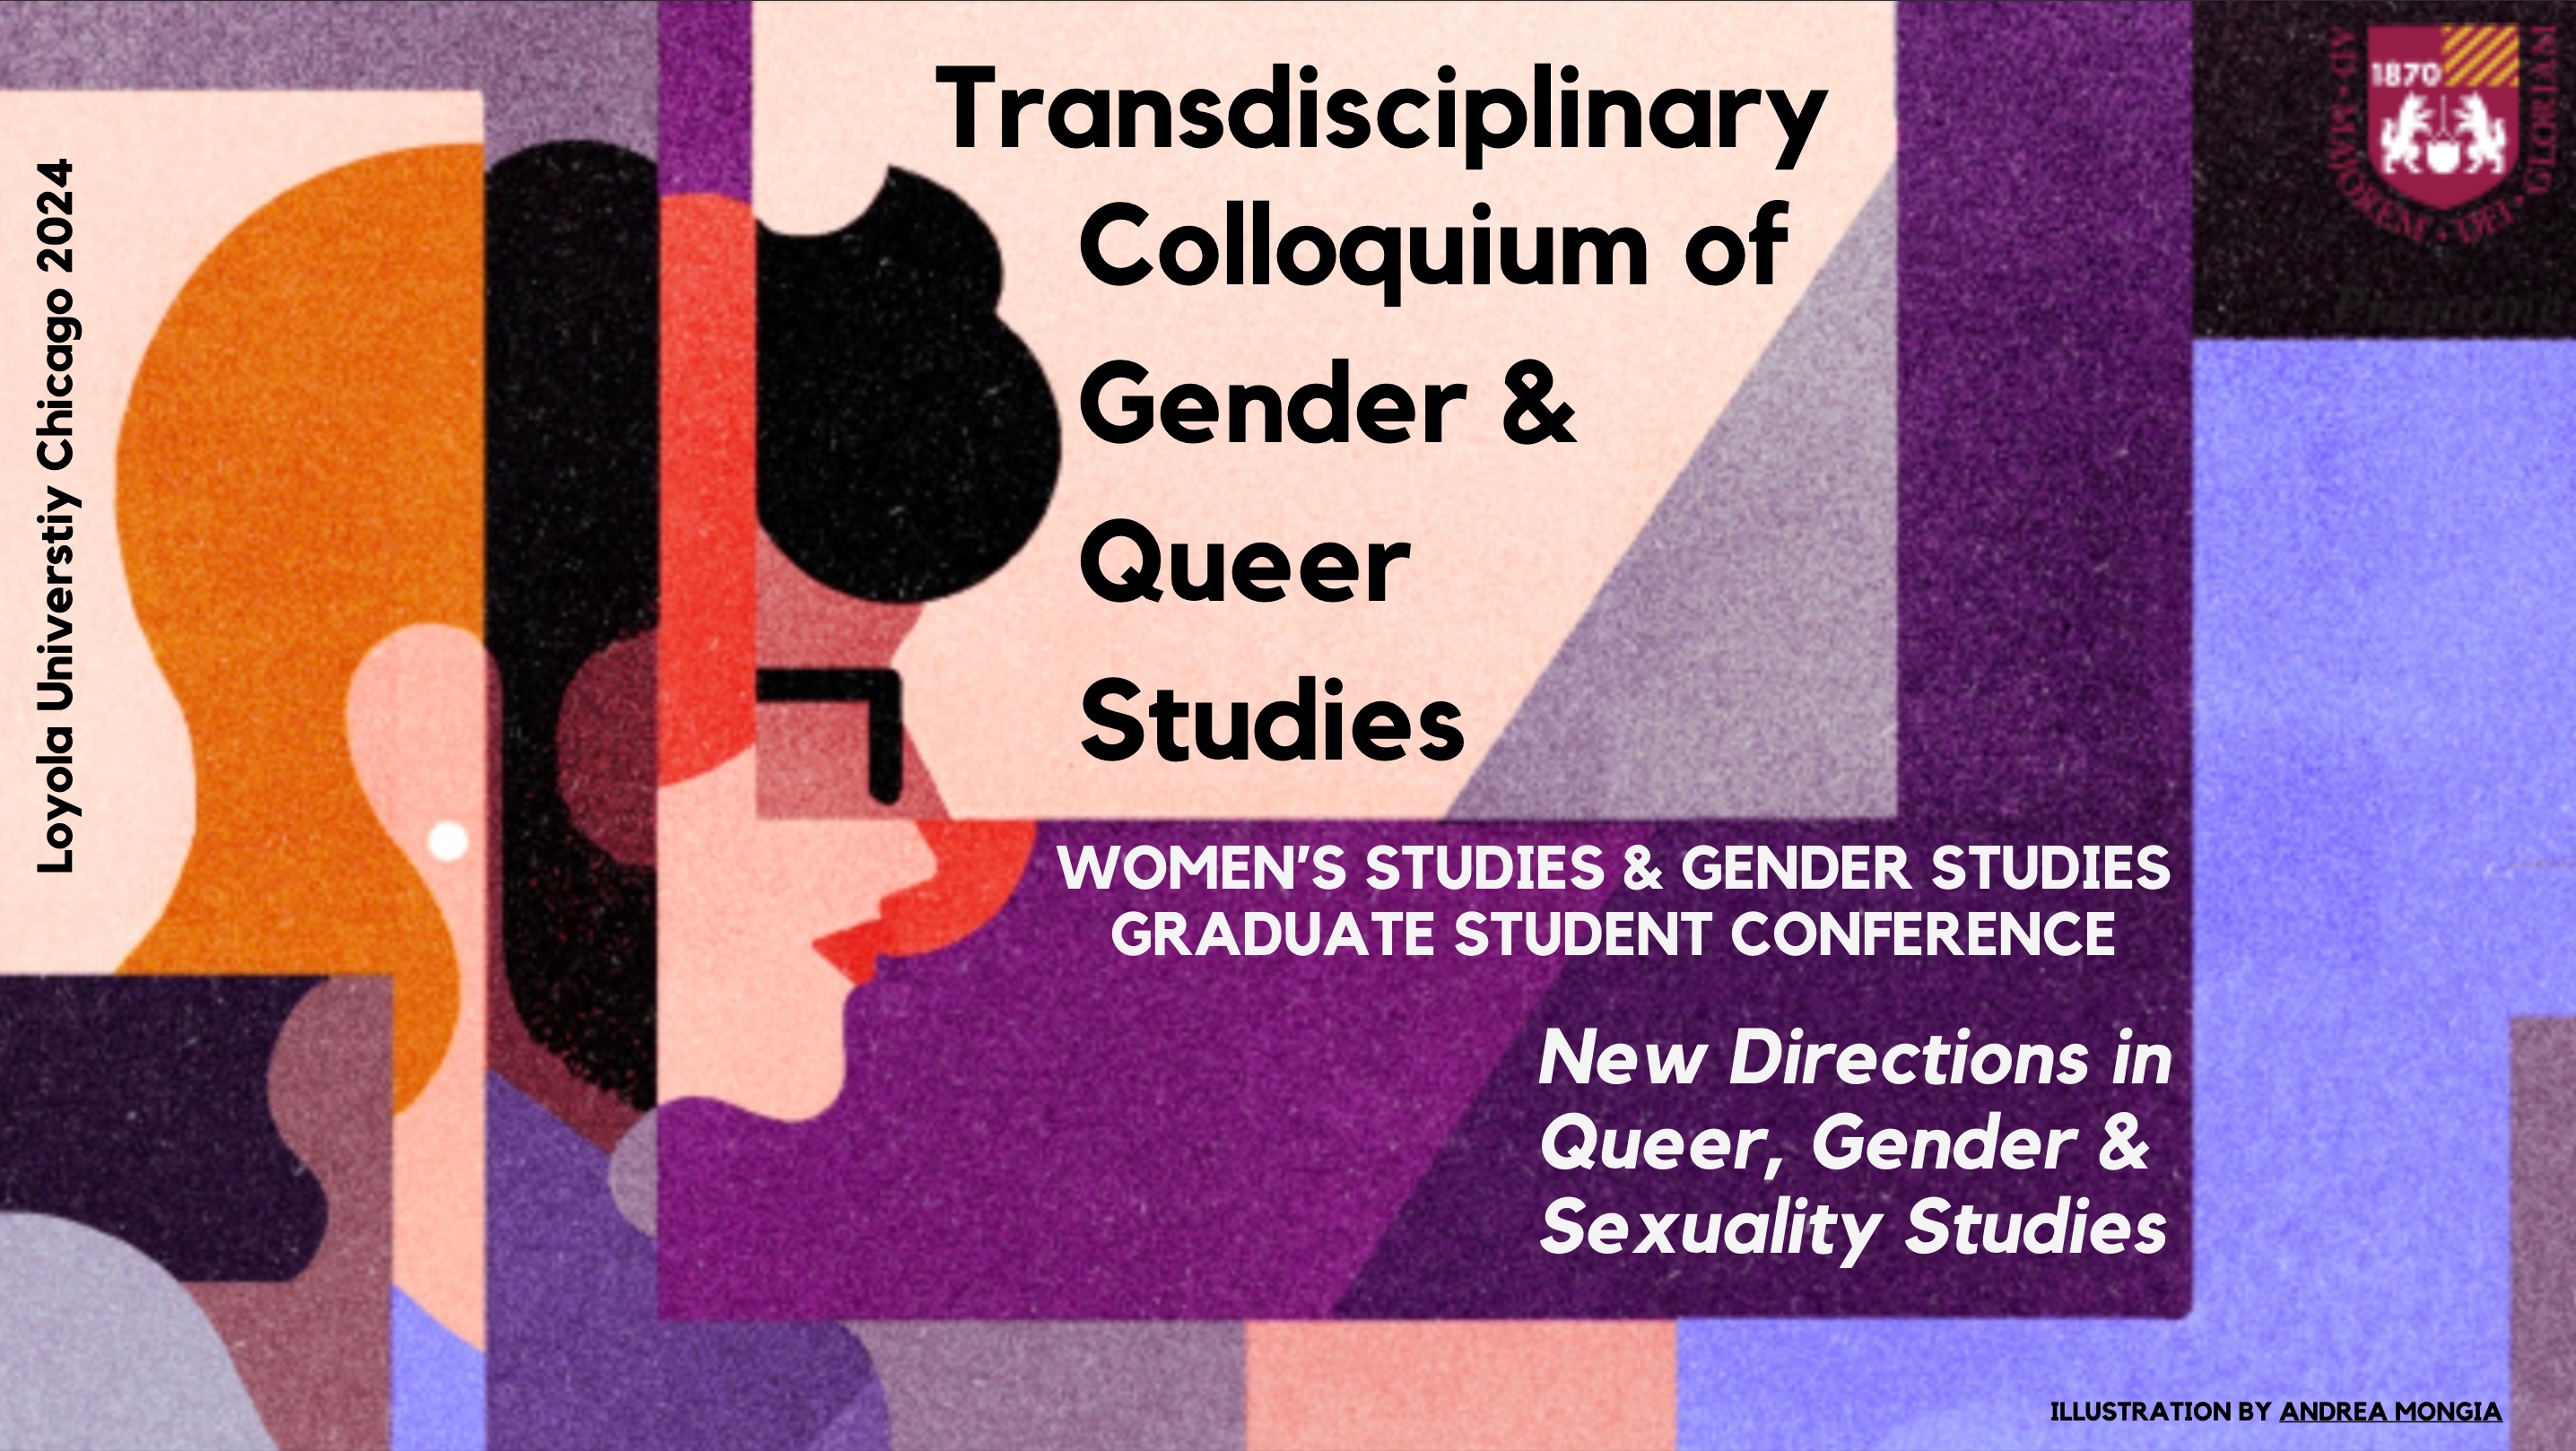 
New Directions in Queer, Gender, and Sexuality Studies 